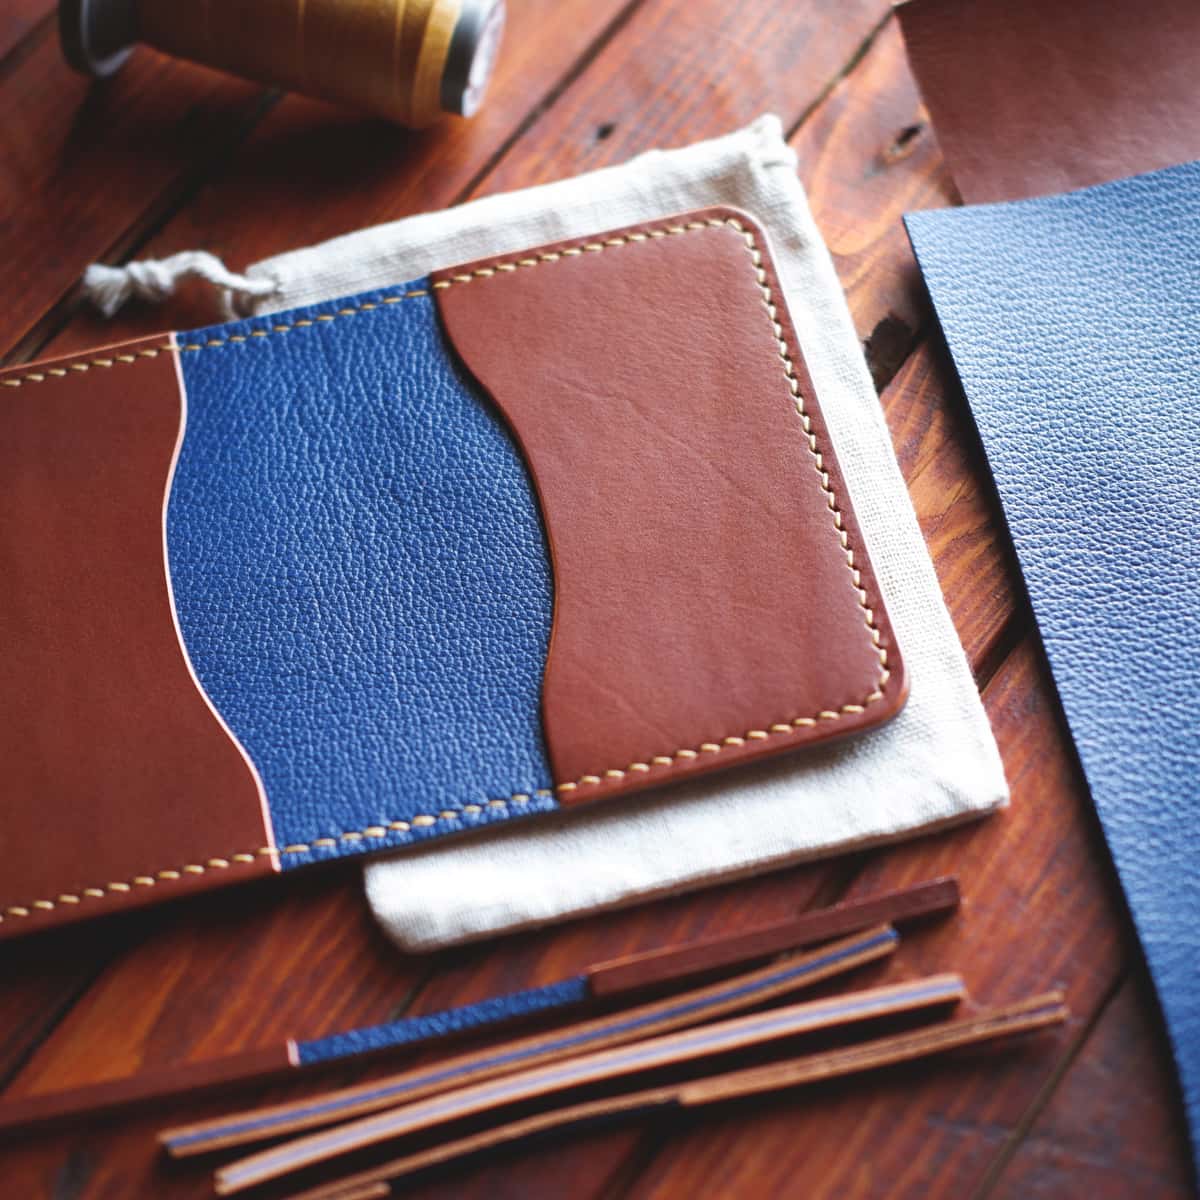 The Monterey Slim Bifold interior in blue and brown leather